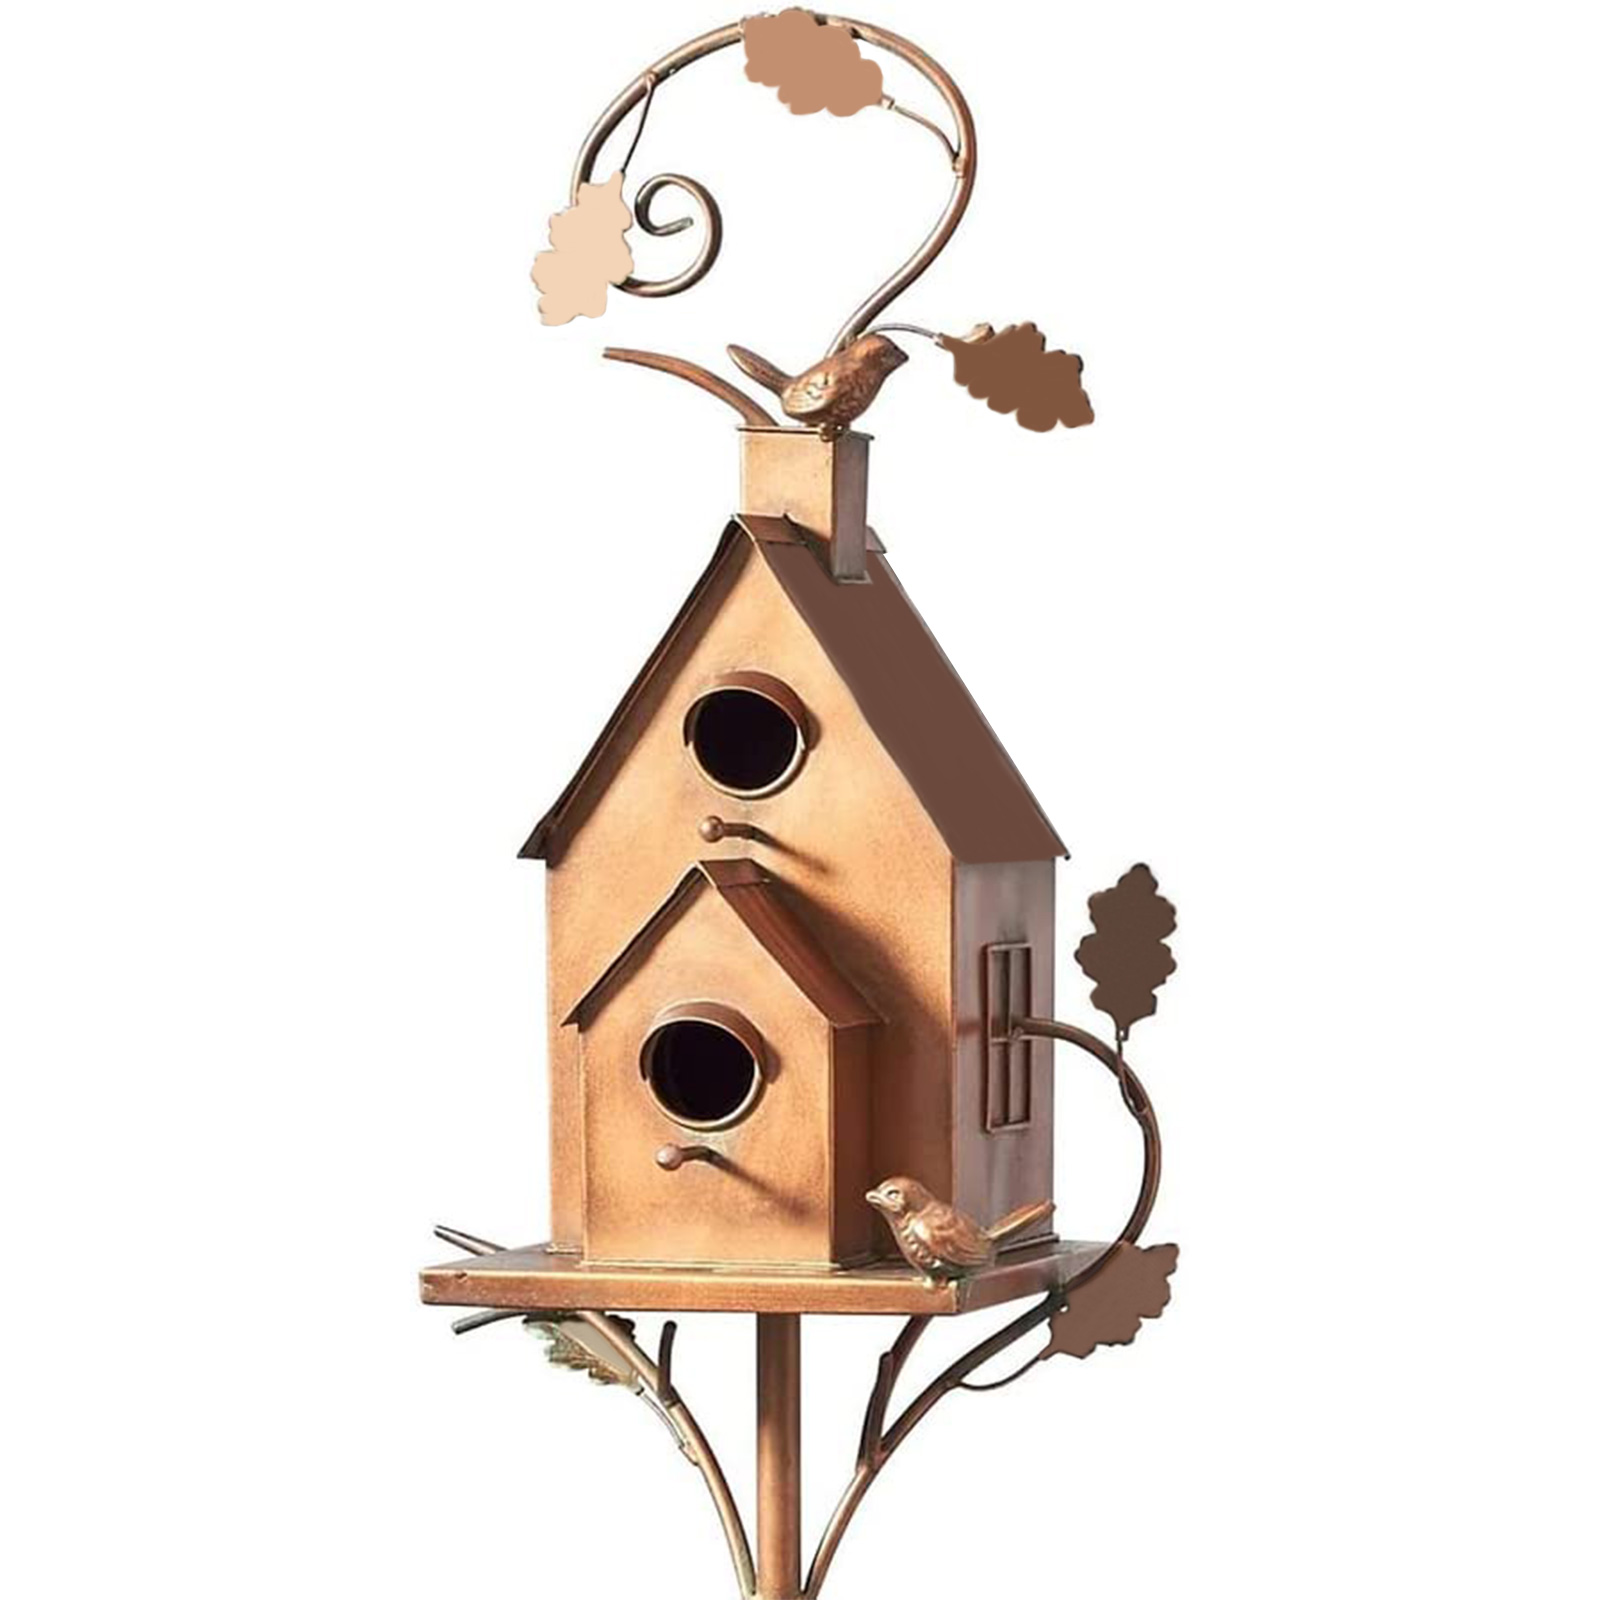 Asdomo Metal Birdhouse Garden Stakes Bird's Nest Multi-size Yellow Easy To Assemble Resting Place For Birds - image 1 of 9